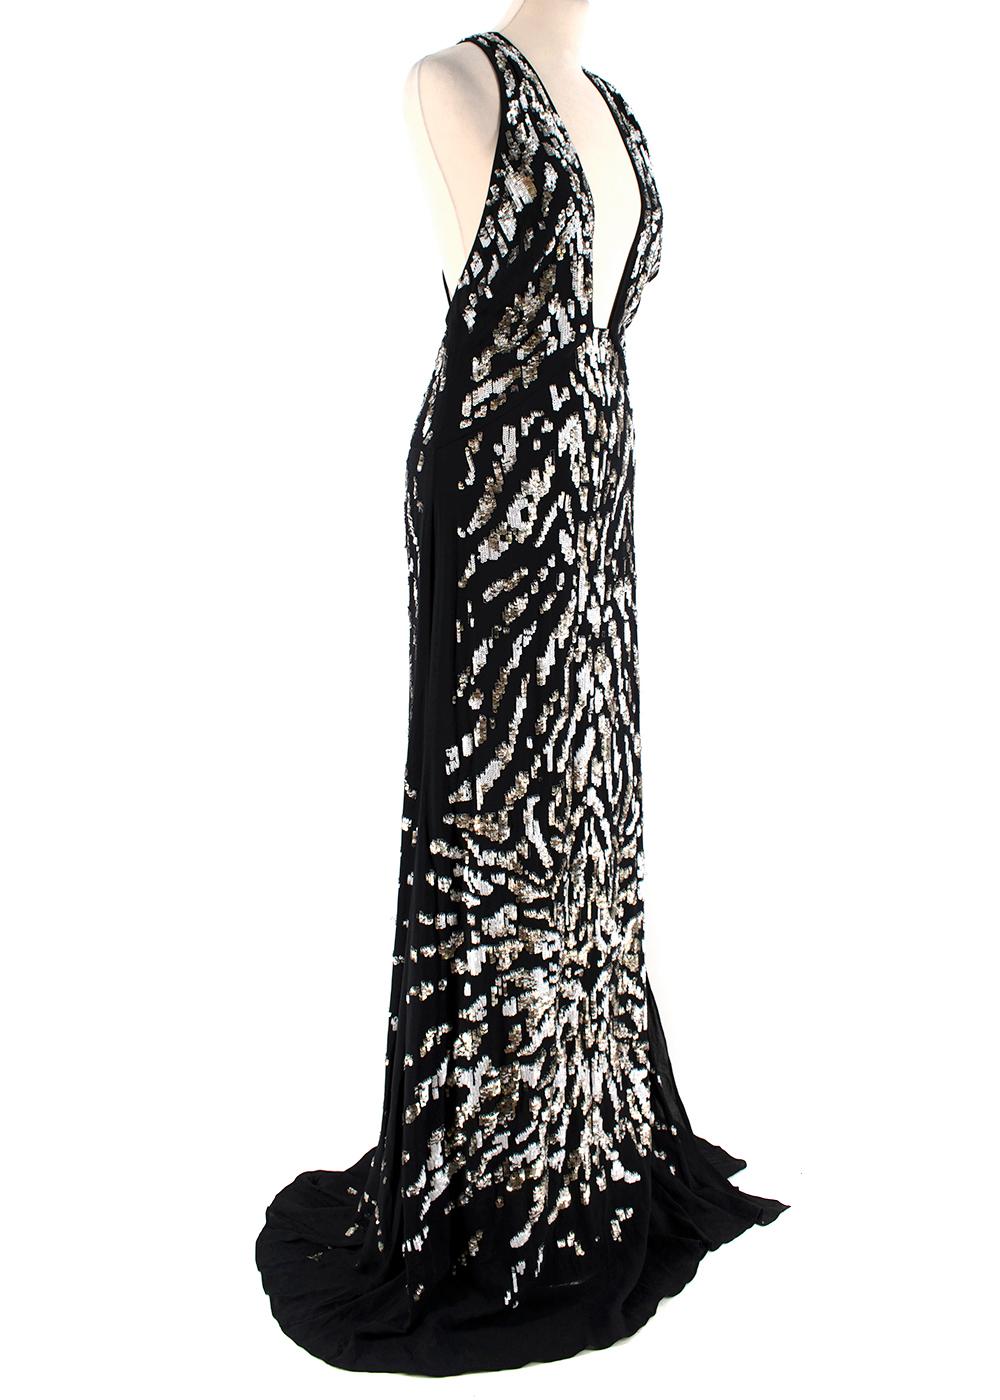 Roberto Cavalli Sequin Embellished Plunge Low Back Gown

- Spaghetti strap backless design
- Complete white and gold sequin embellishments 
- Maxi length 
- Metal strap embellishment
- Cross-over back
- Concealed back zip and eyelet fastening